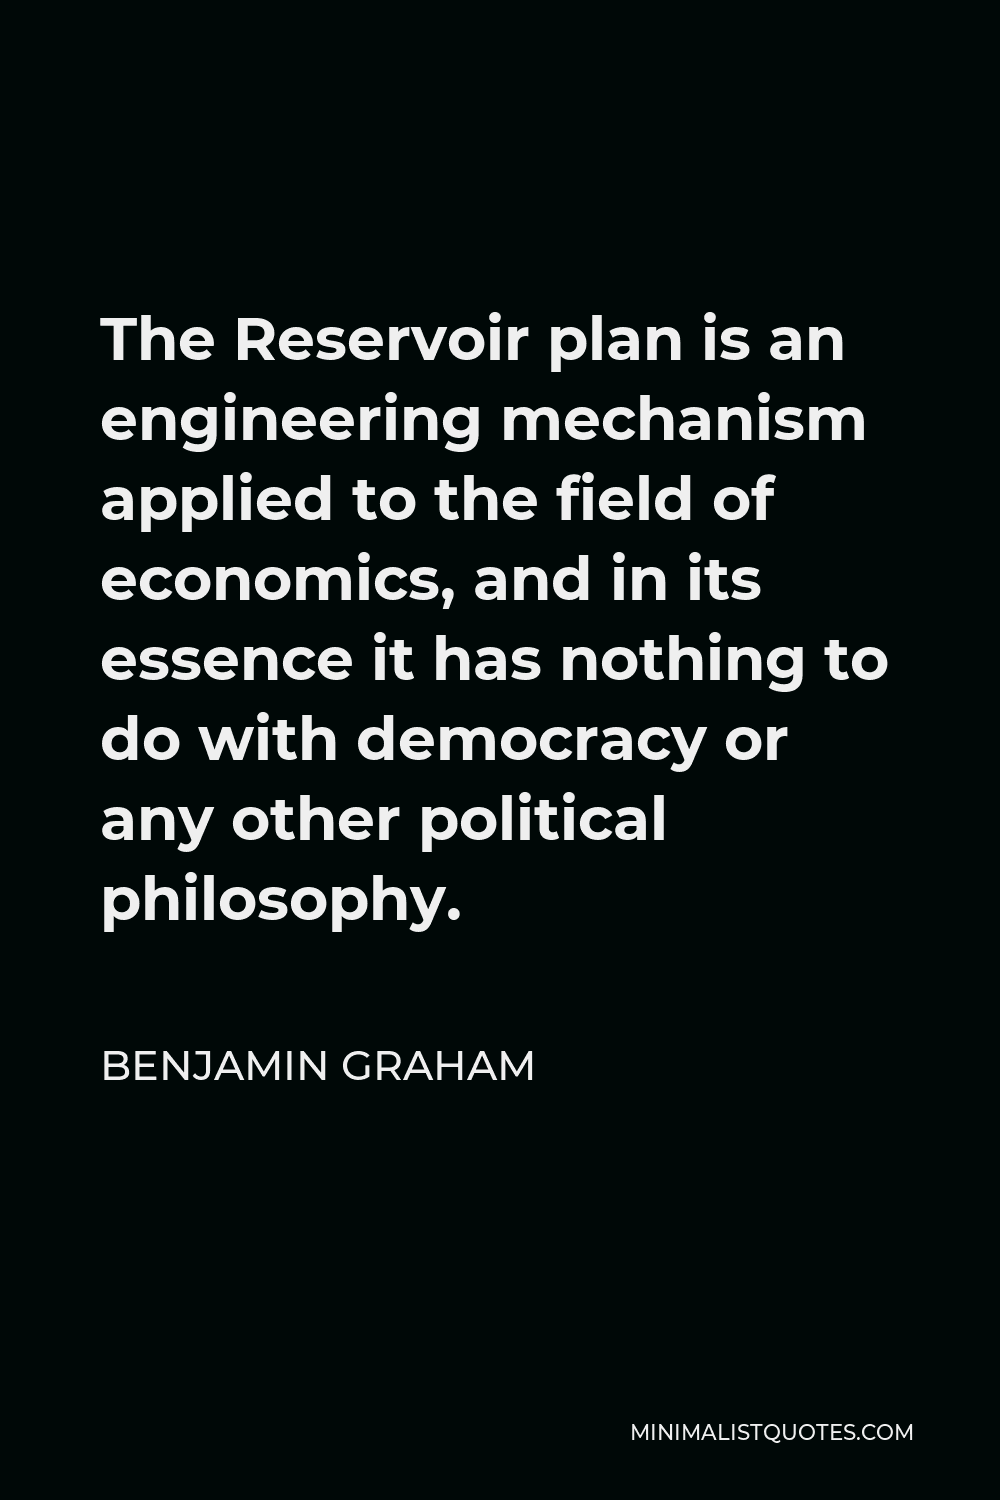 Benjamin Graham Quote - The Reservoir plan is an engineering mechanism applied to the field of economics, and in its essence it has nothing to do with democracy or any other political philosophy.